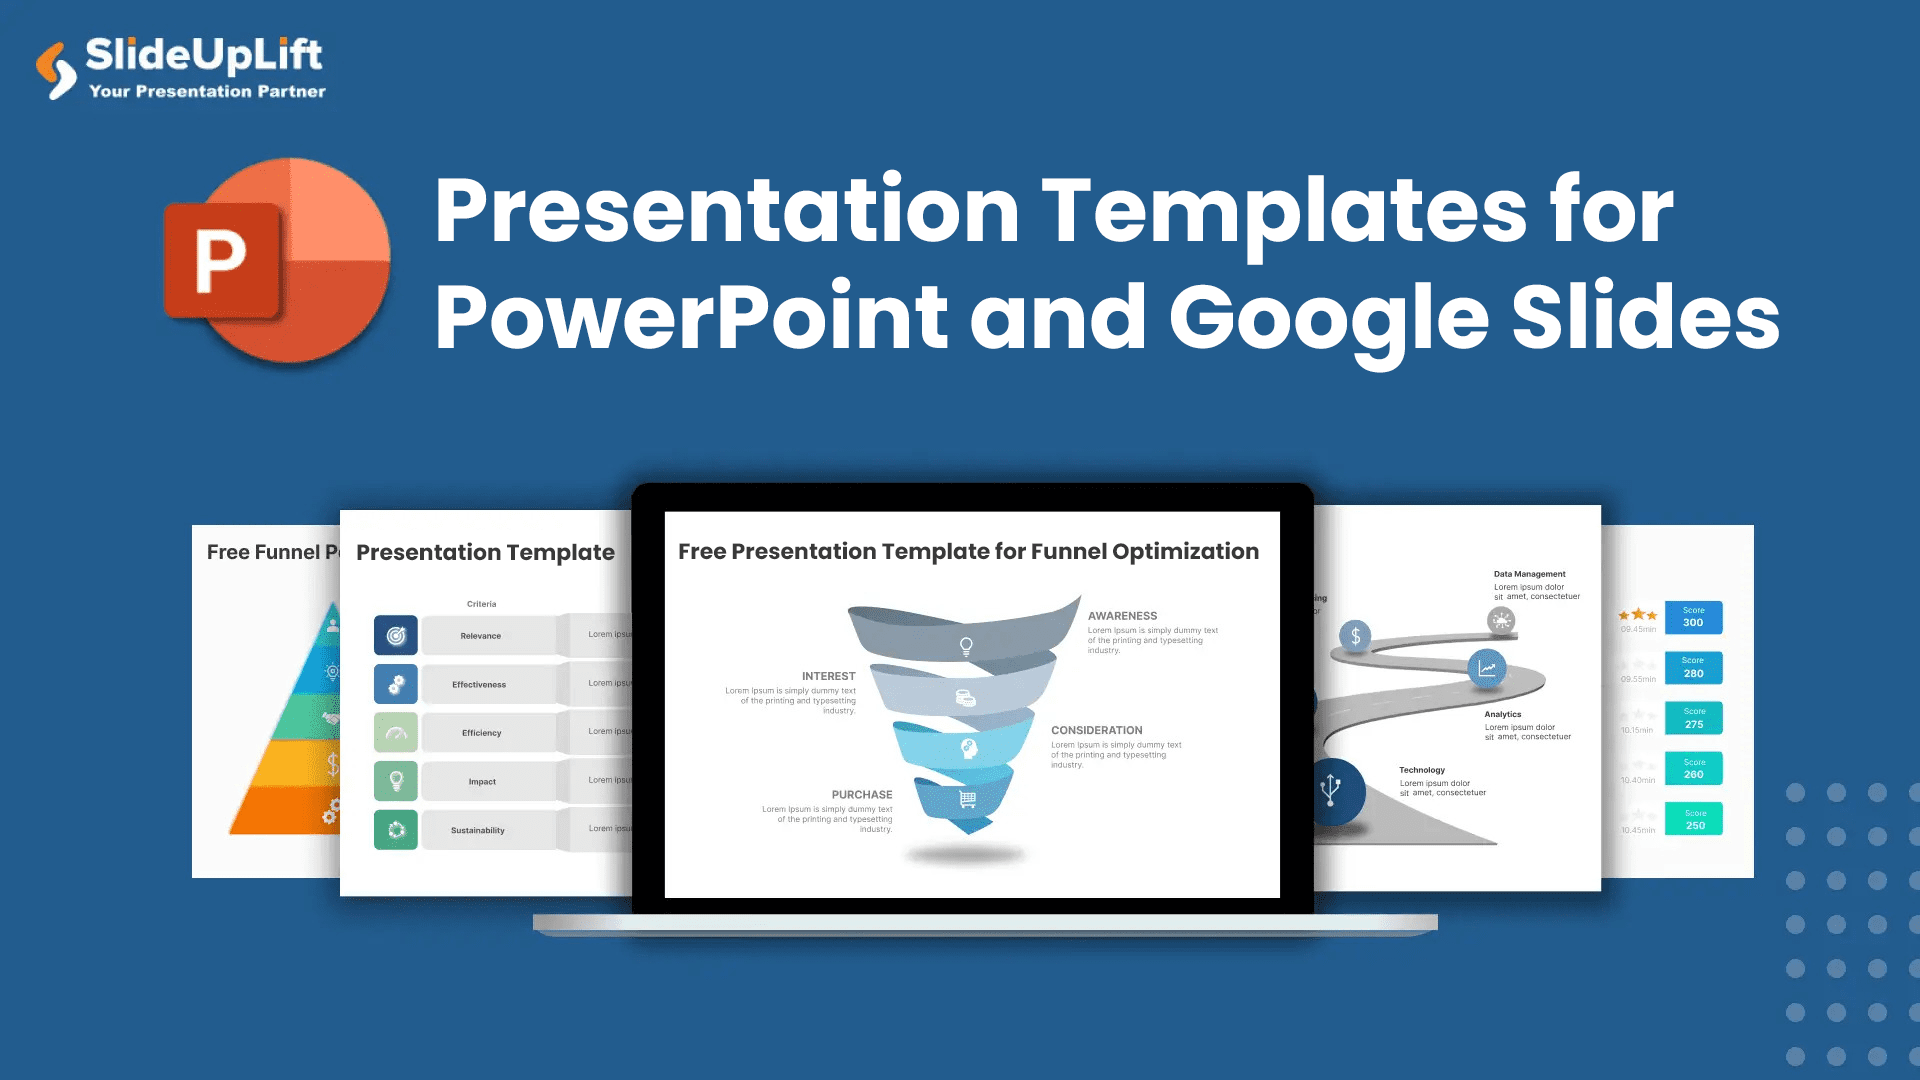 Learning Board Game Google Slides theme & PPT template